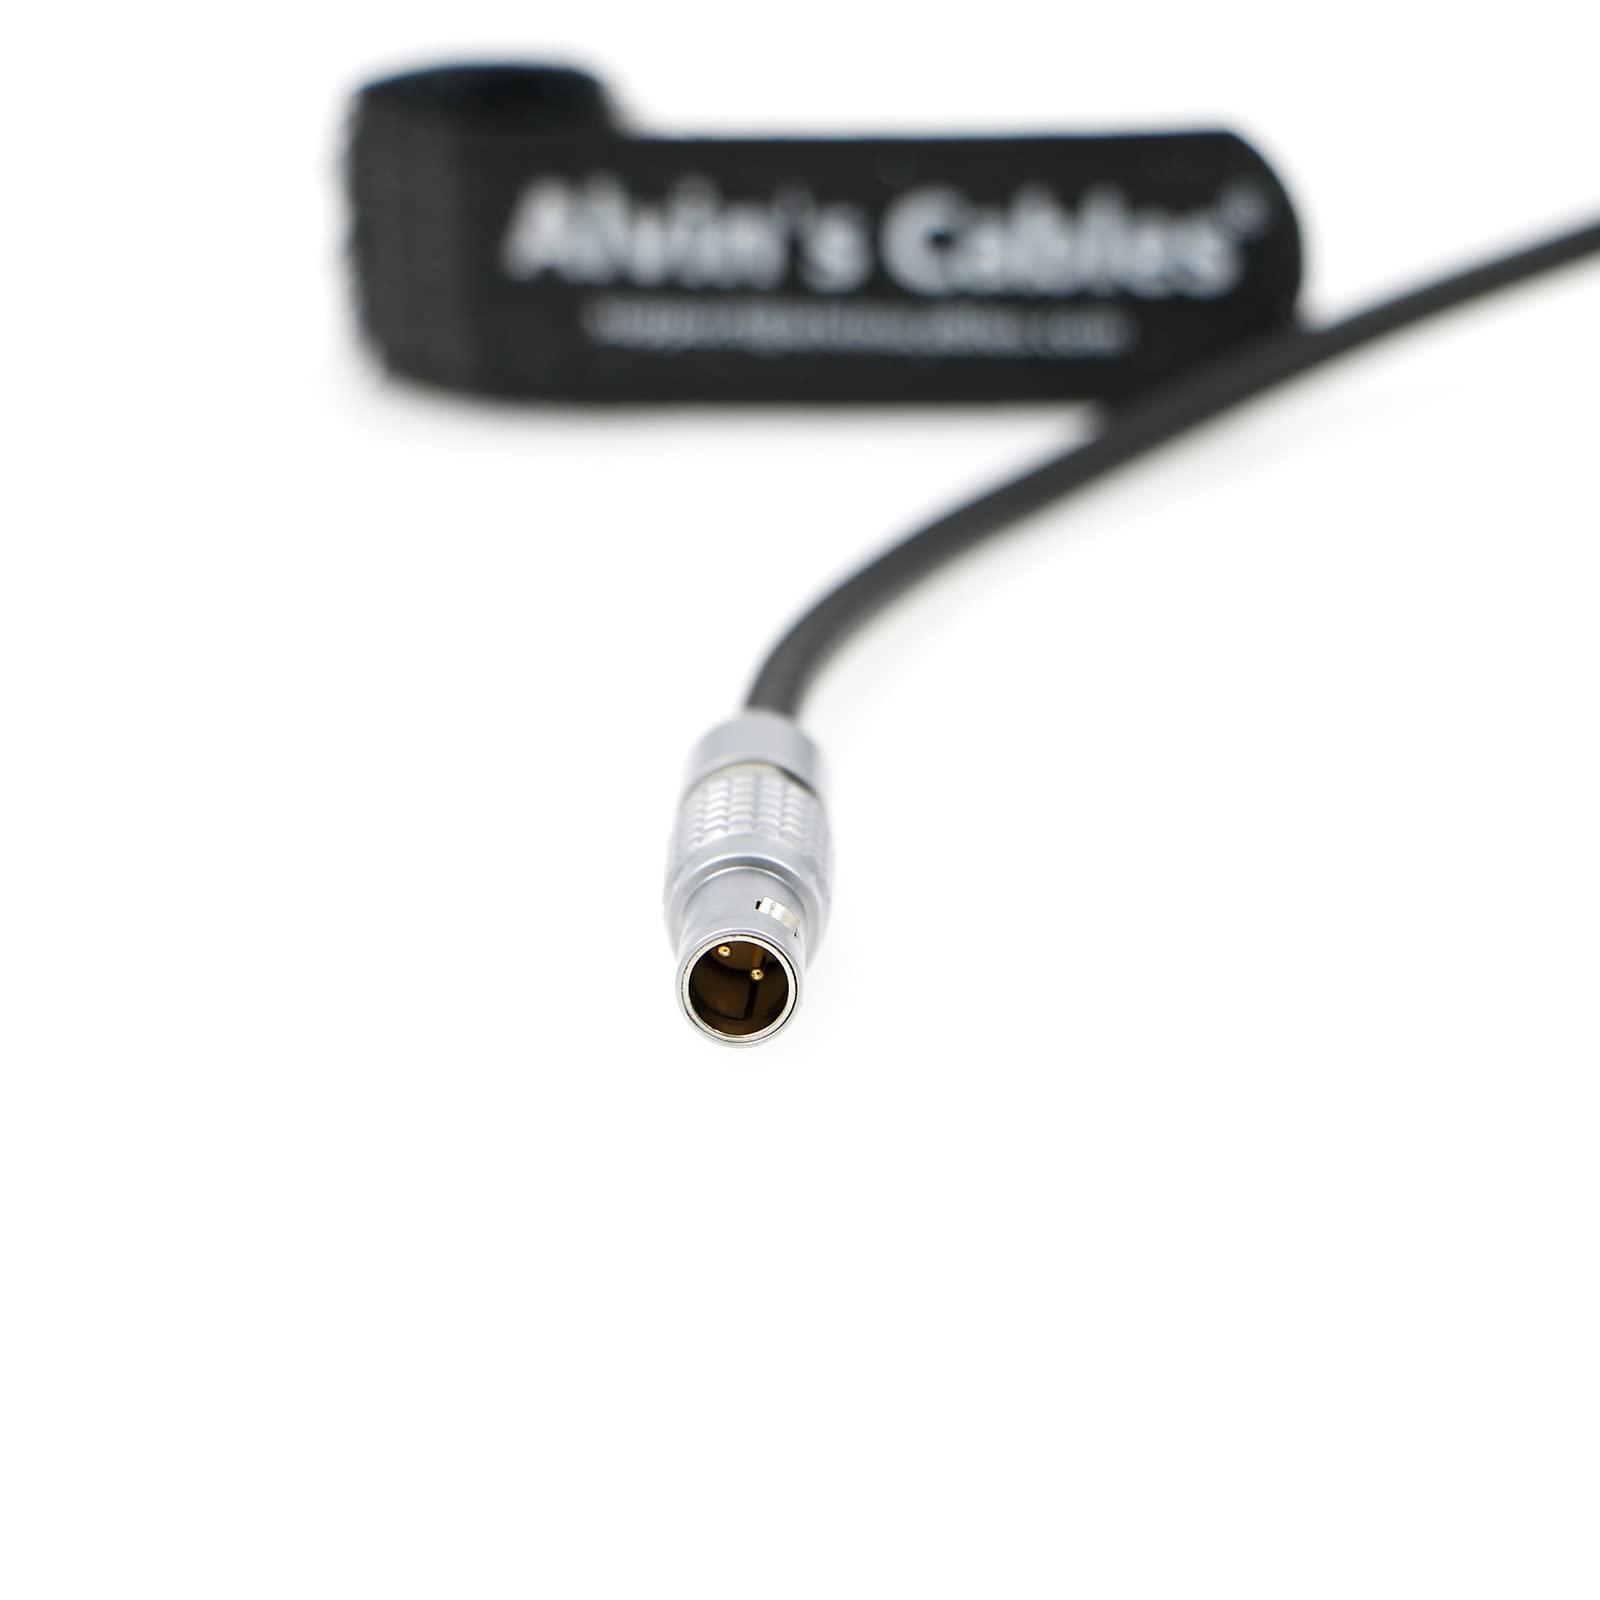 Alvin’s Cables PD USB-C Type-C to 2 Pin Power Cable for Tilta| Teradek| SmallHD| Z-CAM Fast Charging Cable 60cm|24inches